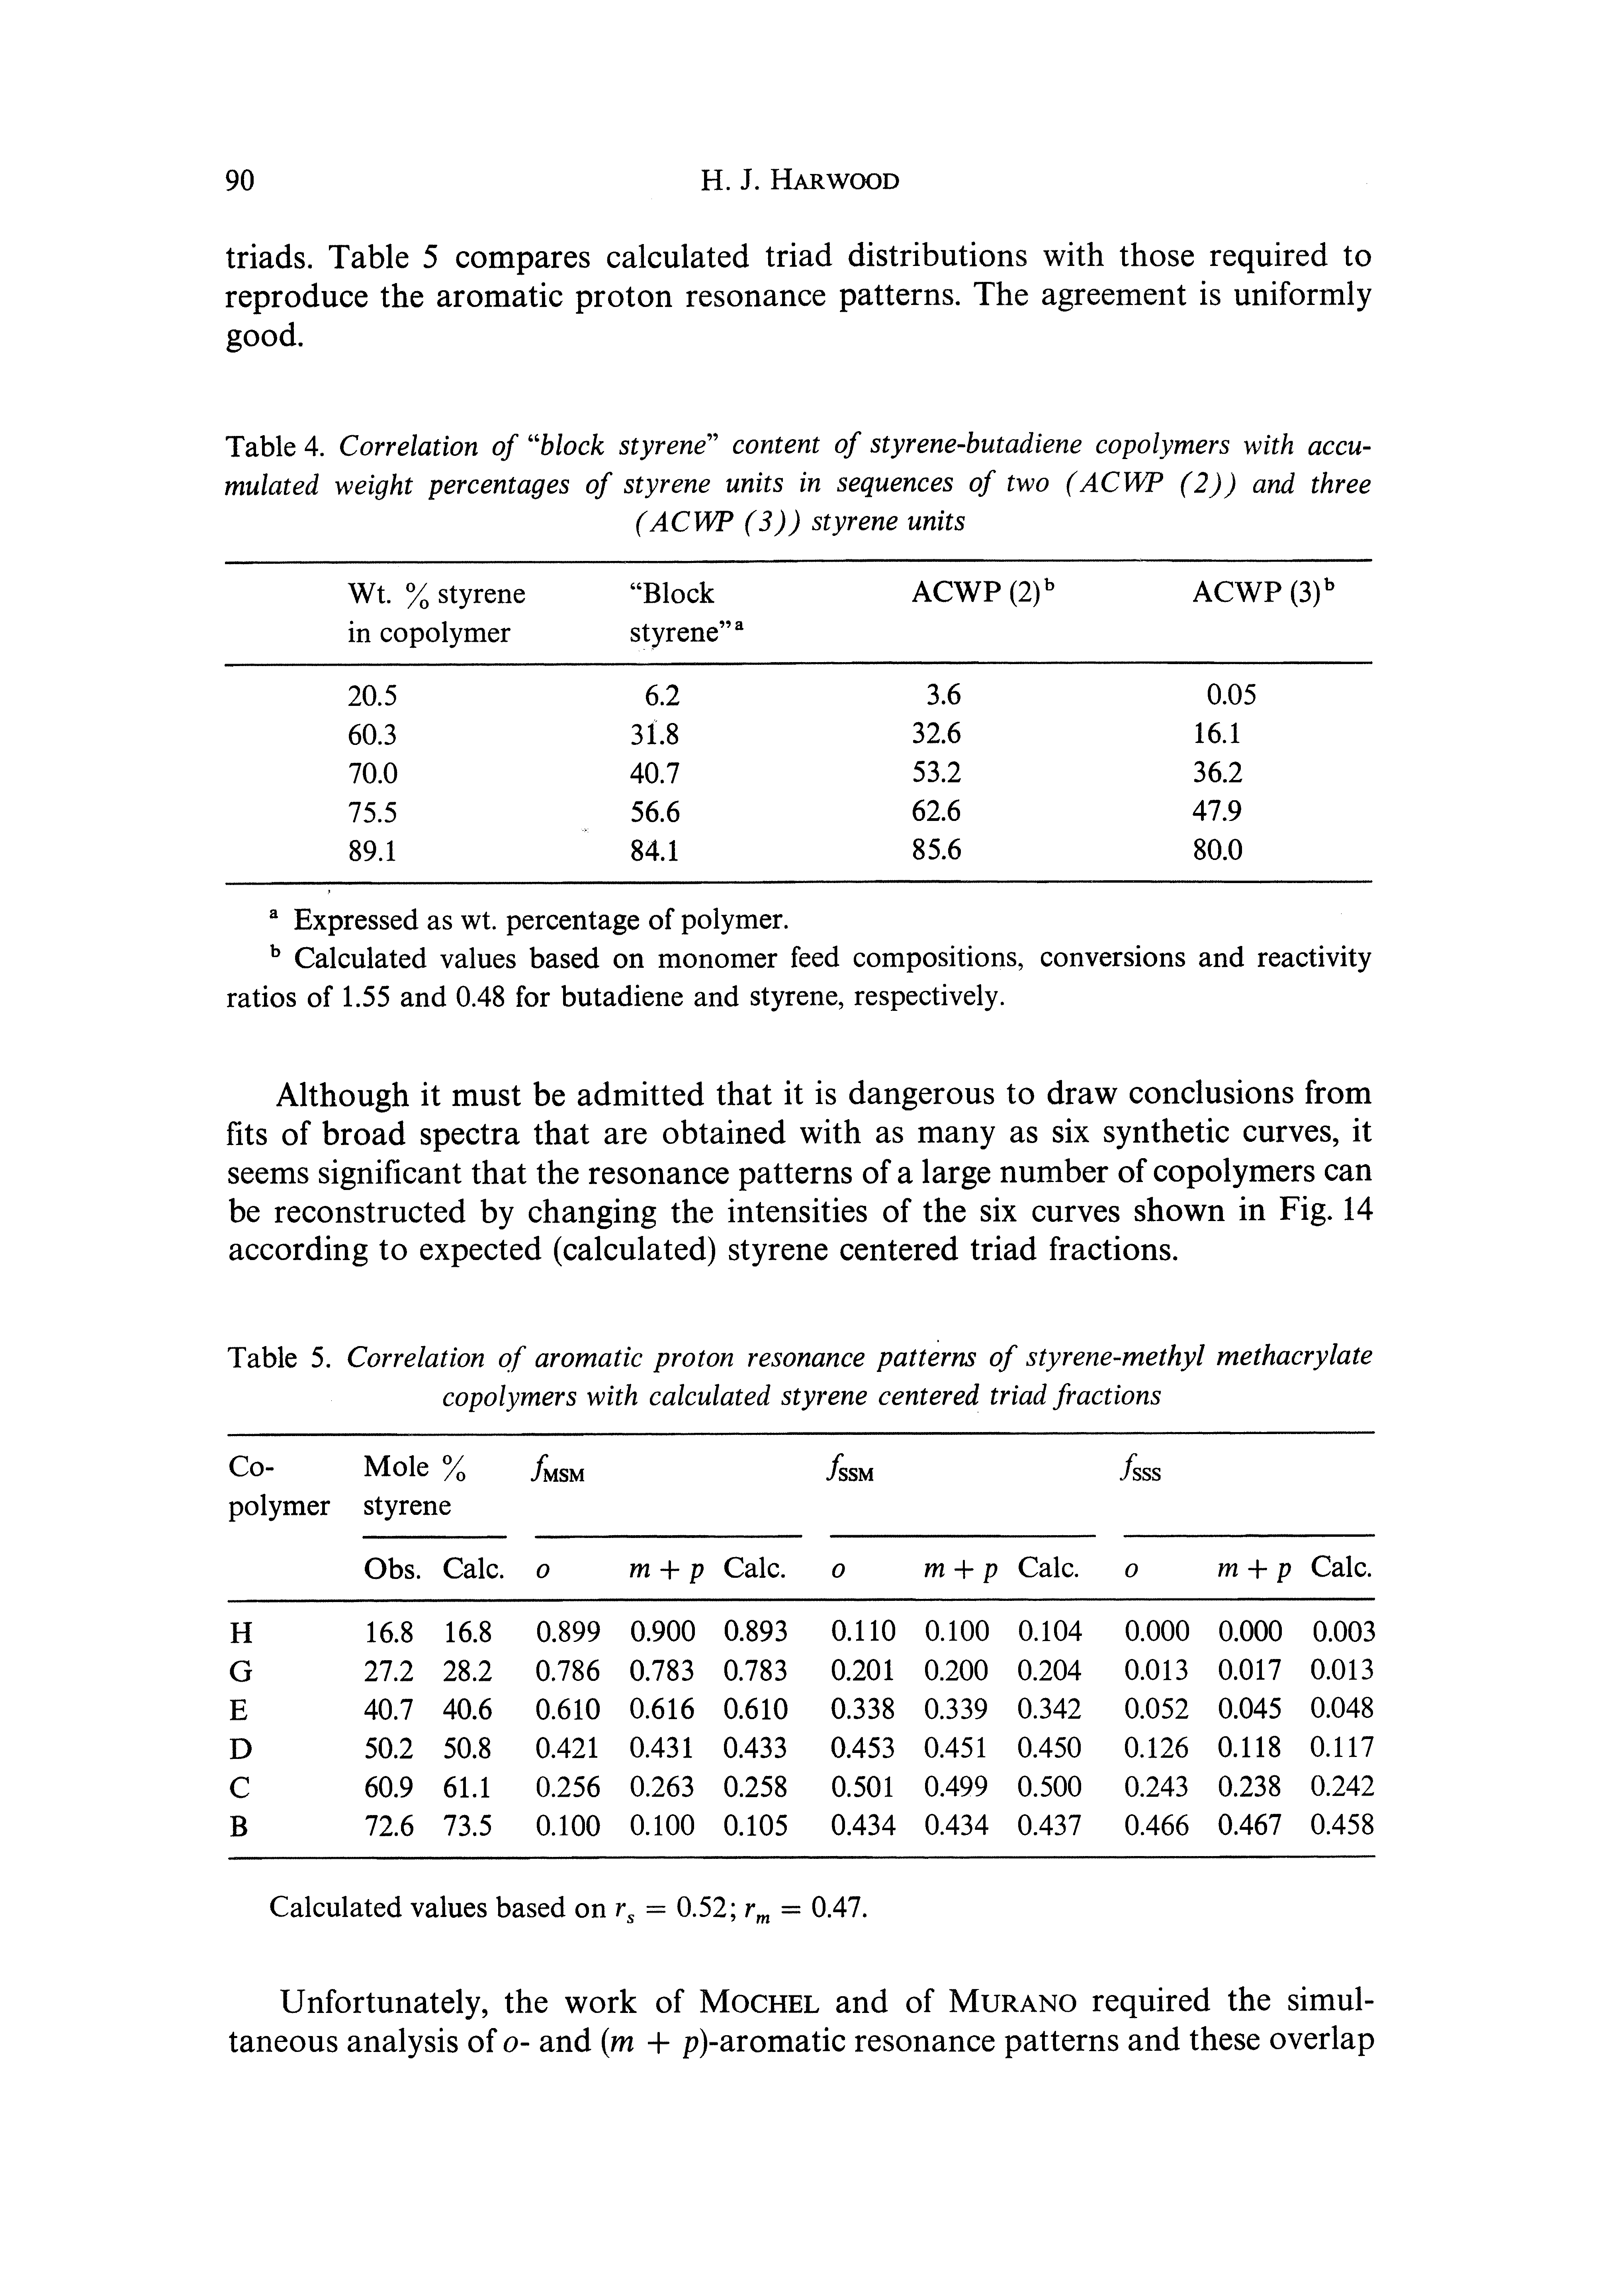 Table 5. Correlation of aromatic proton resonance patterns of styrene-methyl methacrylate copolymers with calculated styrene centered triad fractions...